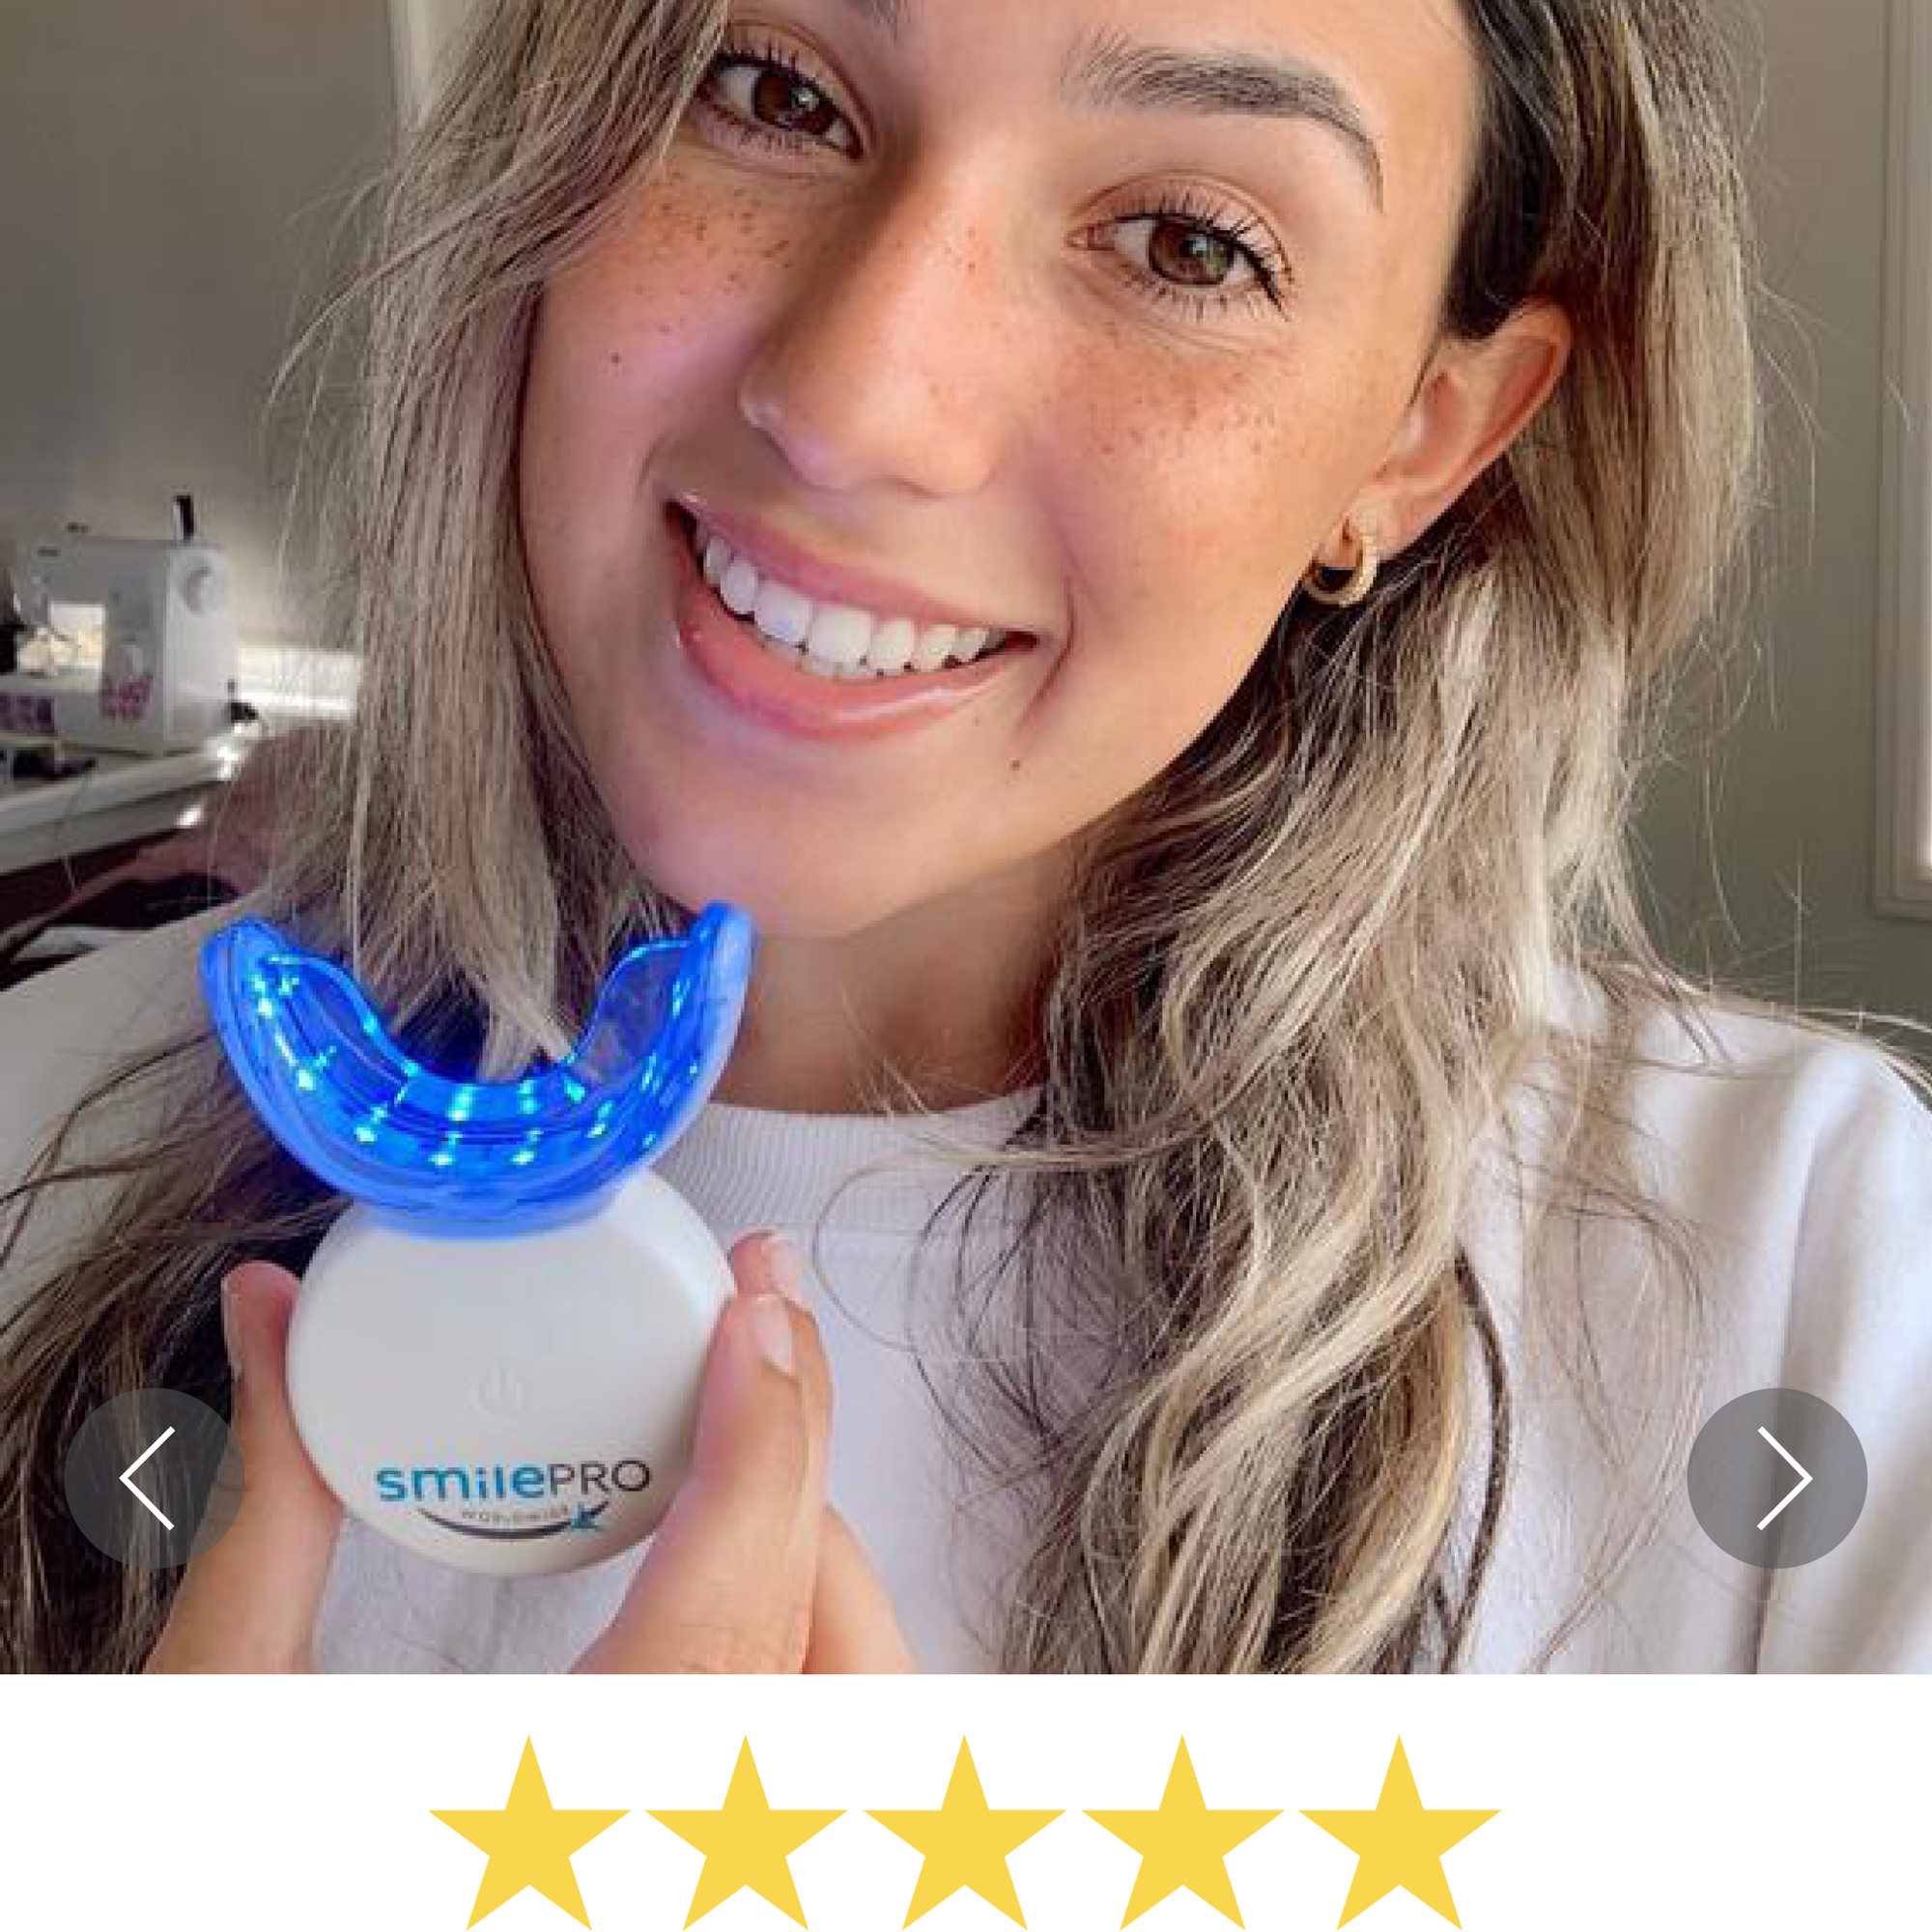 Fast whitening results, see customer reviews on SmilePro Worldwide.